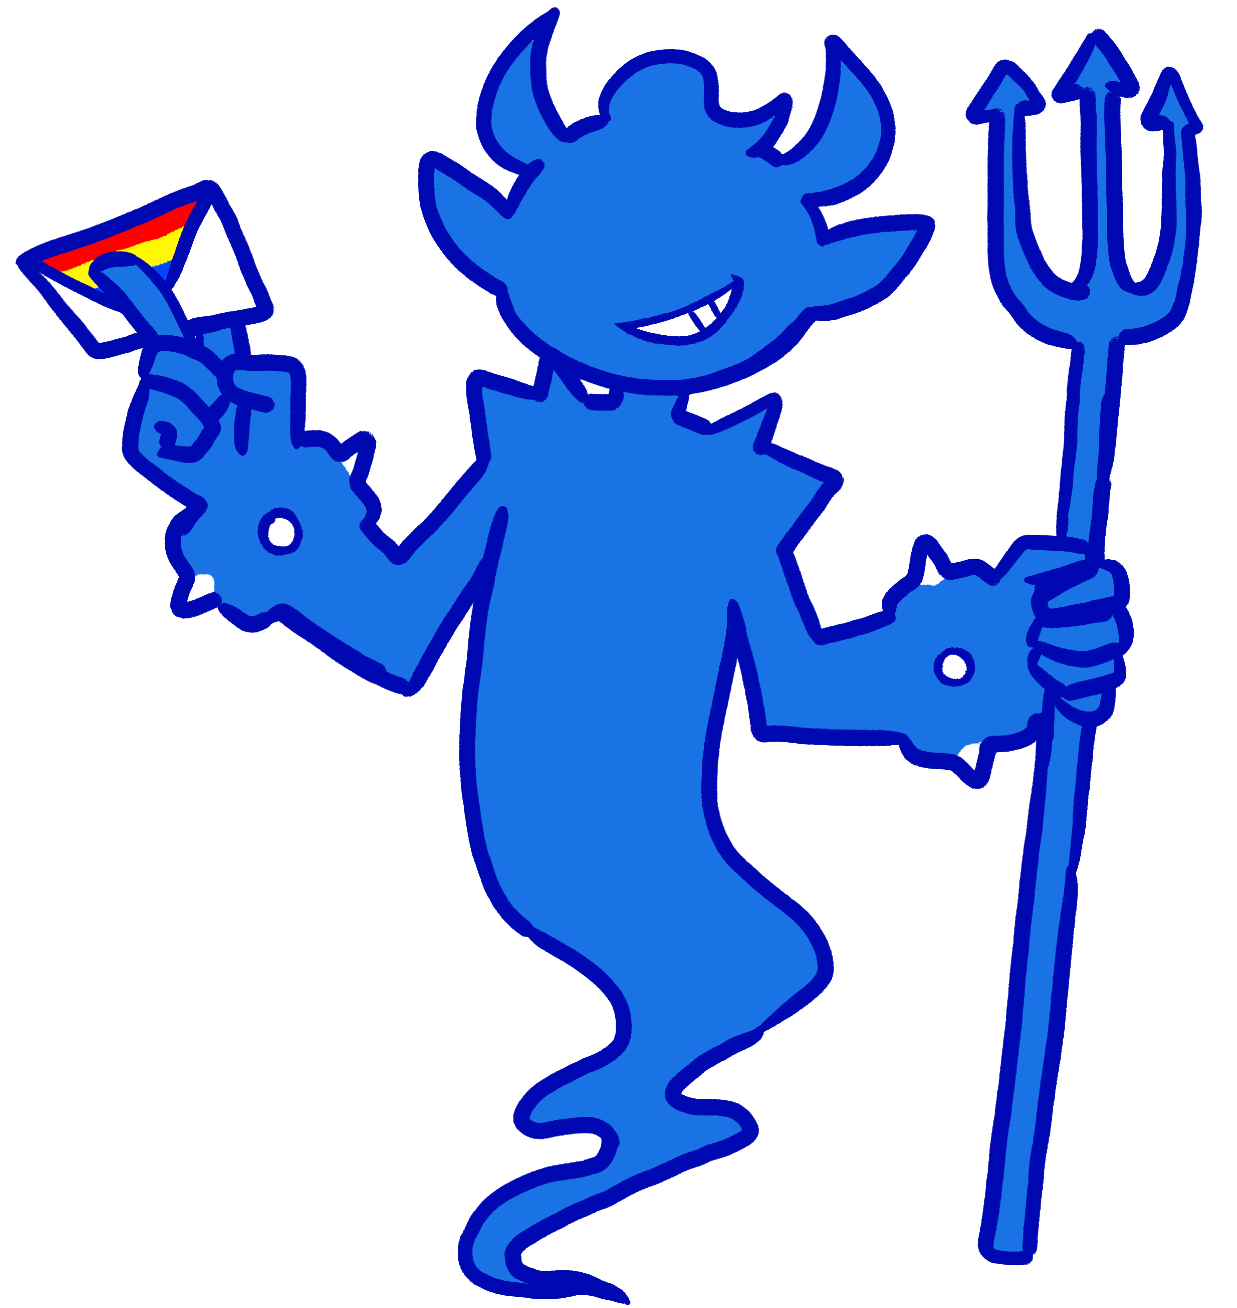 MZD's shadow in a blue hue. They're holding a three-pronged spear in one hand and a letter invitation in the other, grinning.